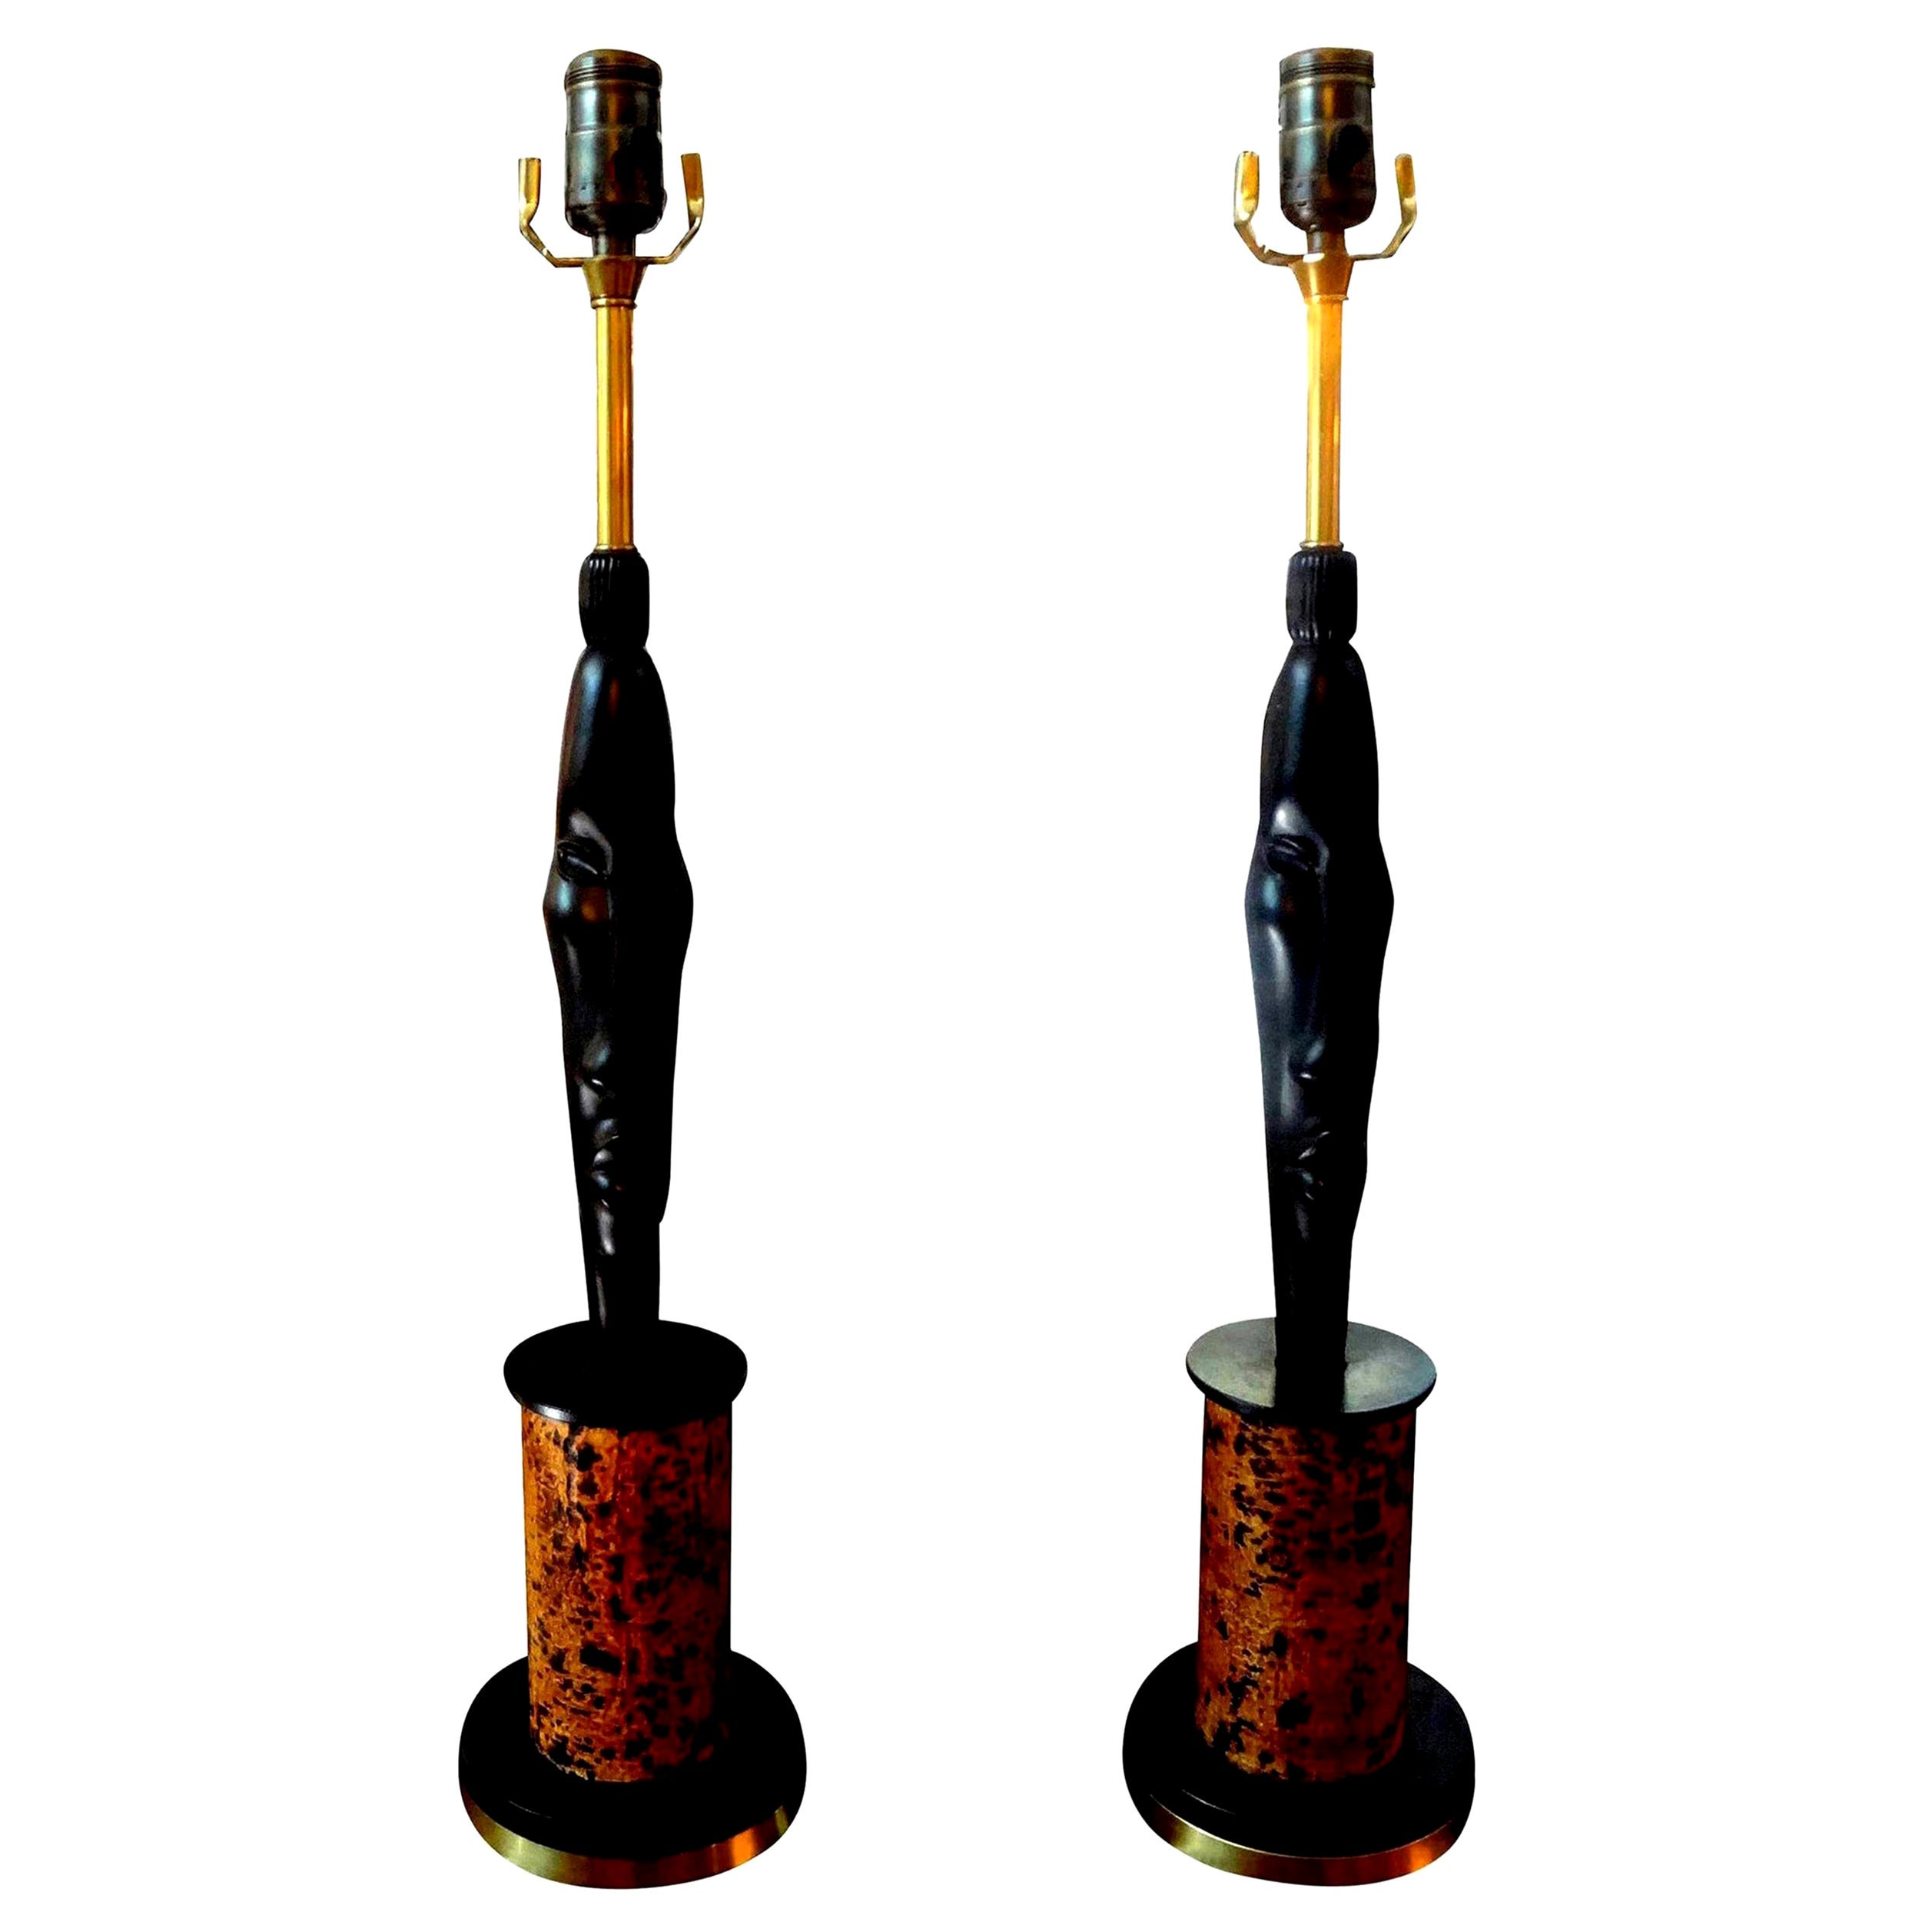 Pair of Midcentury African Inspired Modernist Lamps For Sale